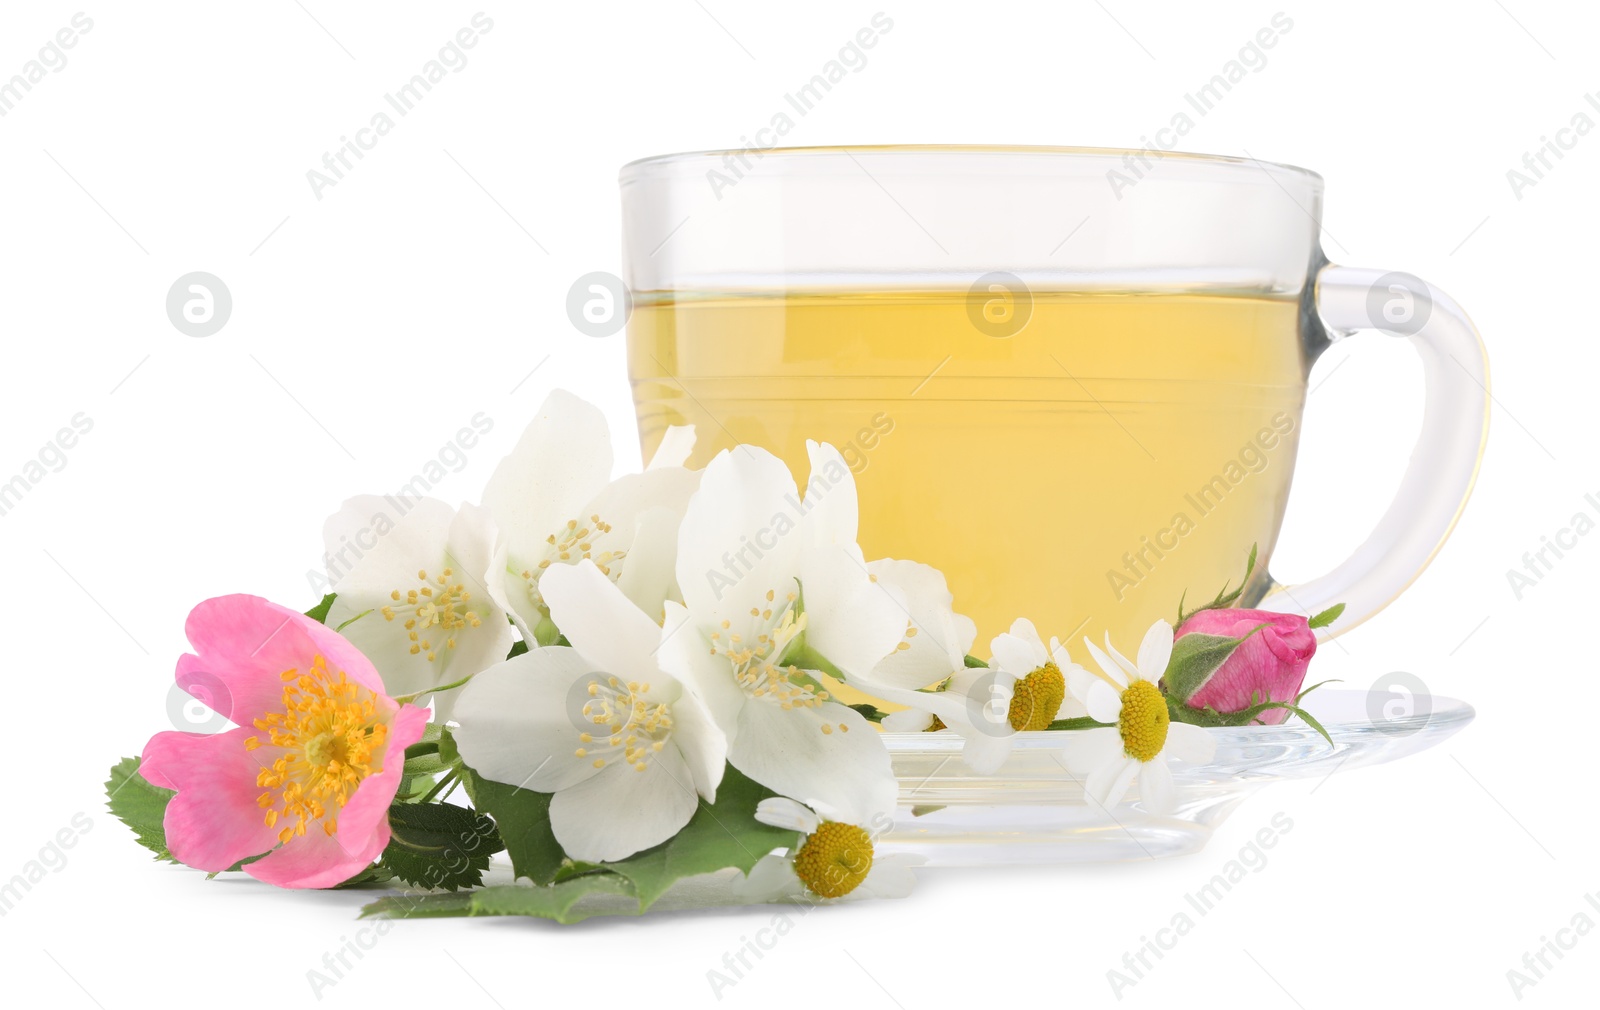 Photo of Aromatic herbal tea in glass cup and flowers isolated on white